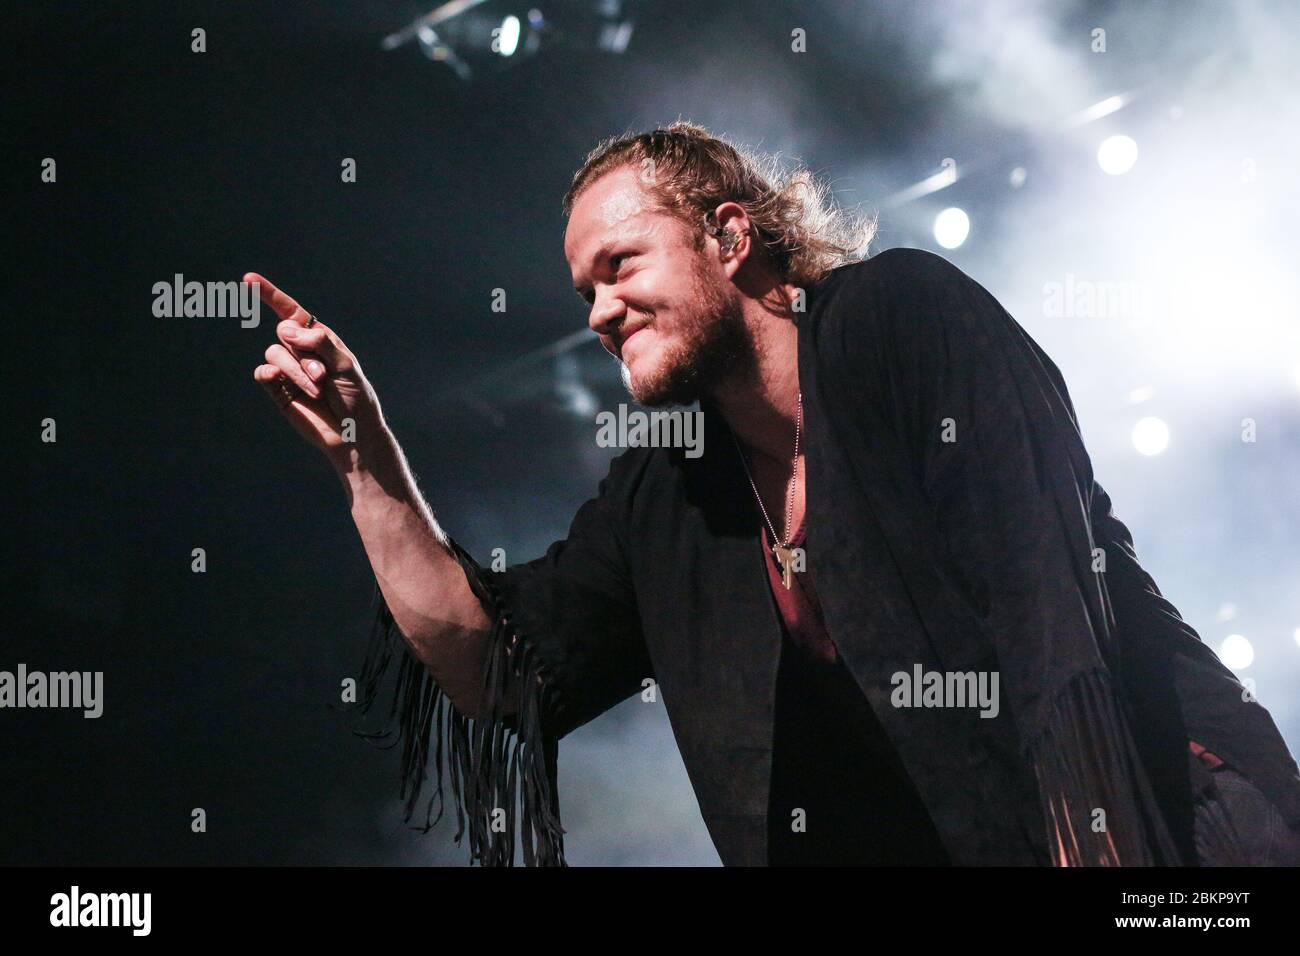 Singer Dan Reynolds, of Imagine Dragons as the band performs live at the First Direct Arena in Leeds, West Yorkshire, UK to promote their album, Smoke Stock Photo